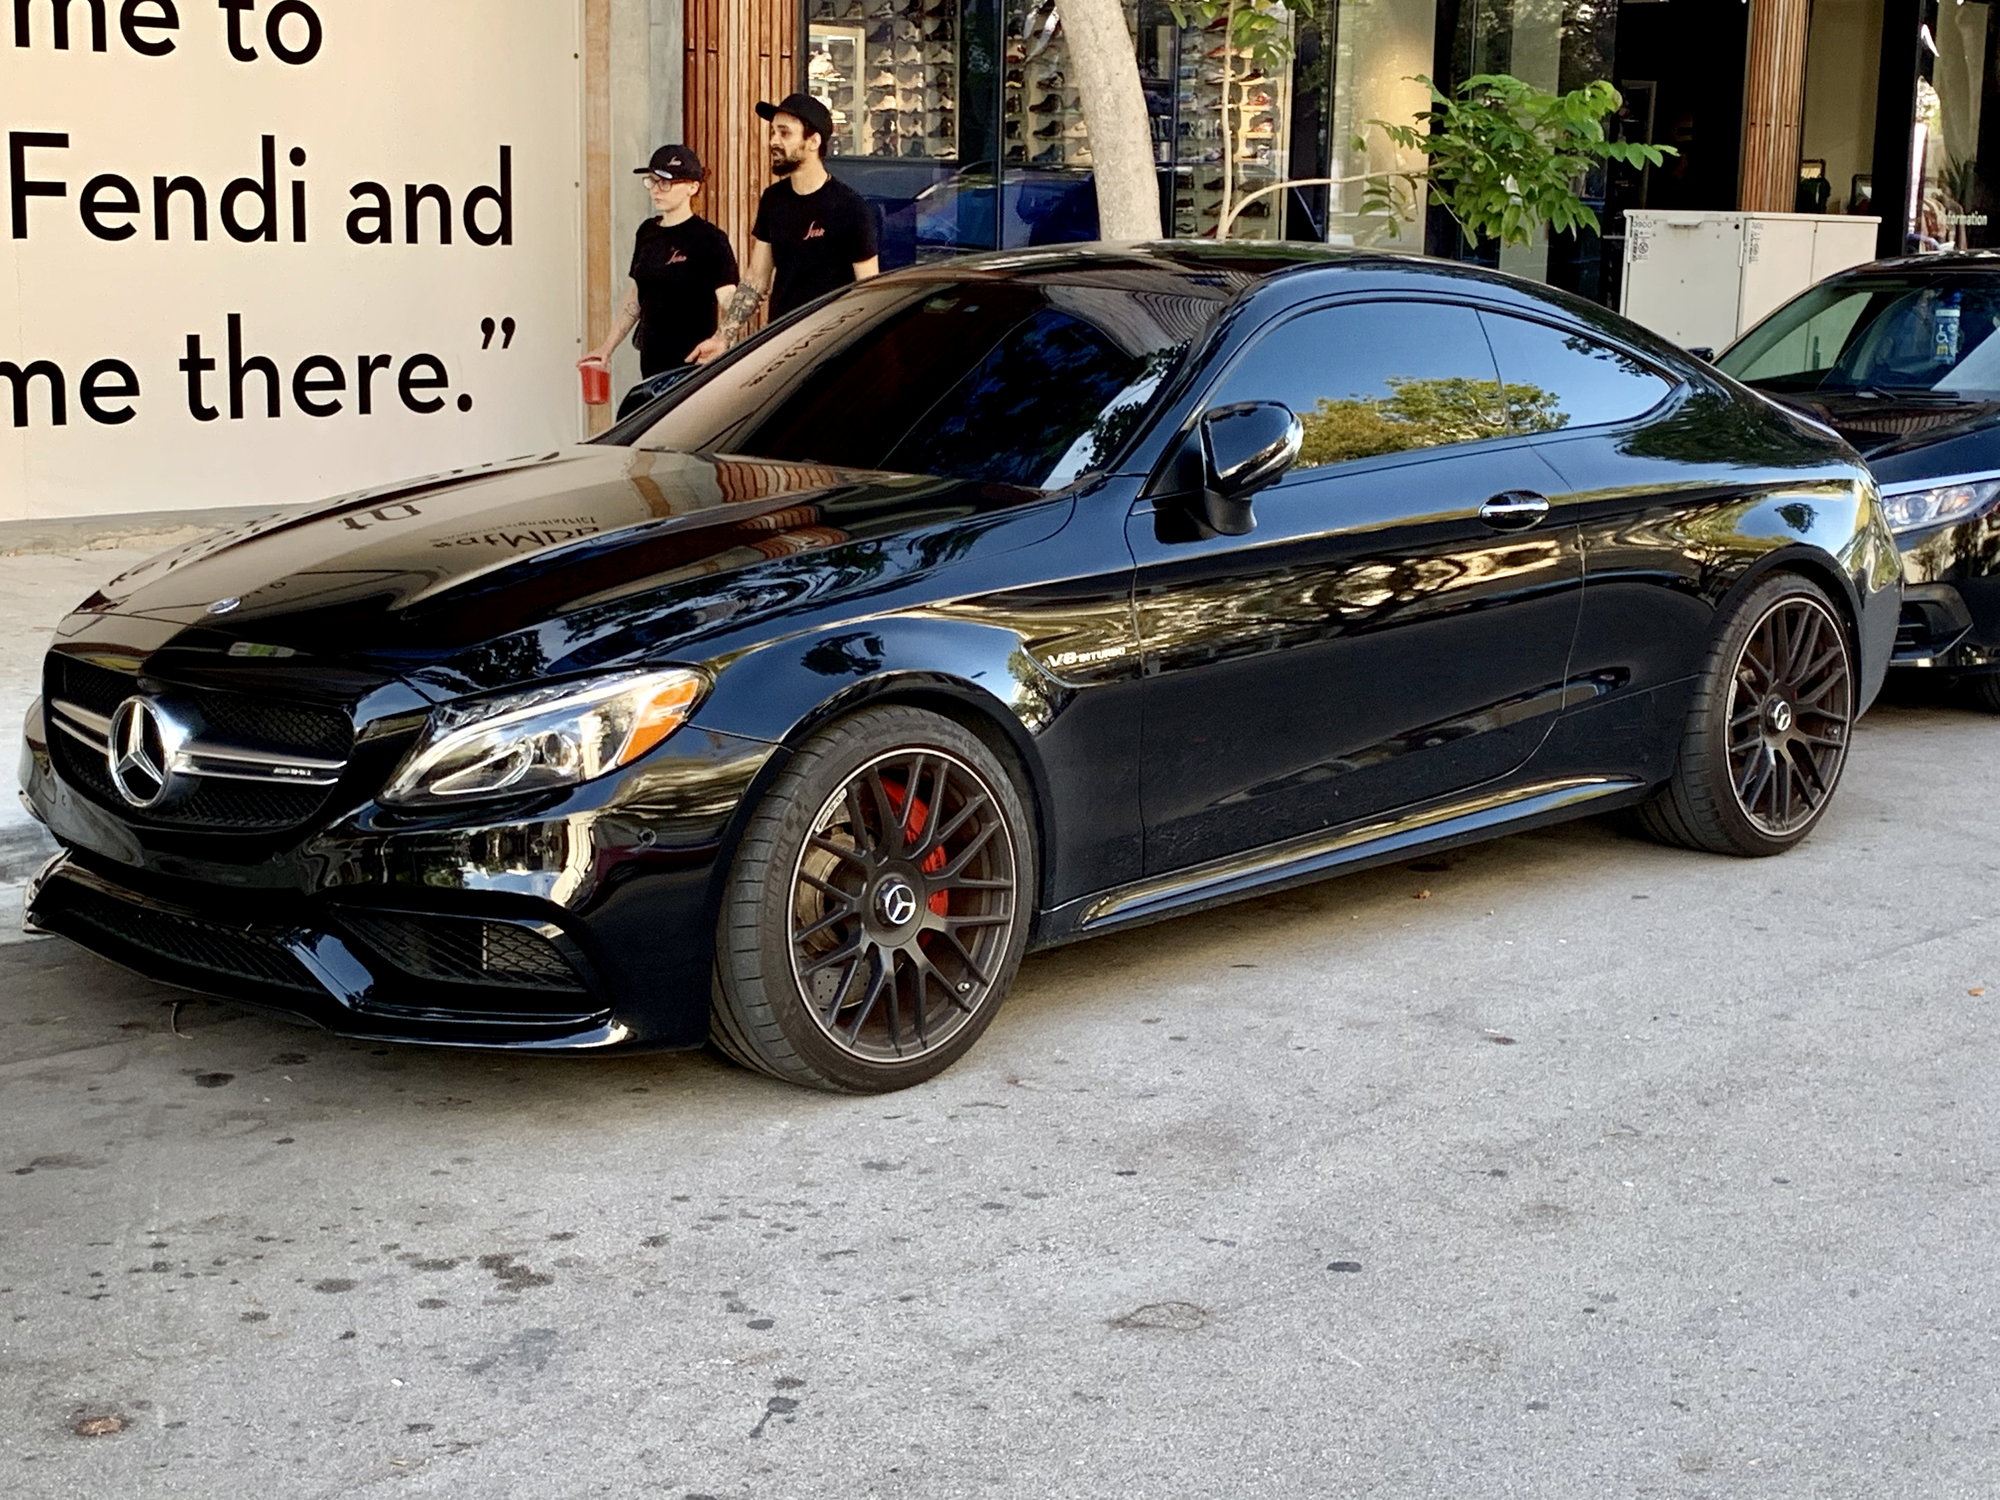 2017 Mercedes Black C63 AMG S Coupe Dinan Tuned 609HP 656 TQ for Sale -  MBWorld.org Forums